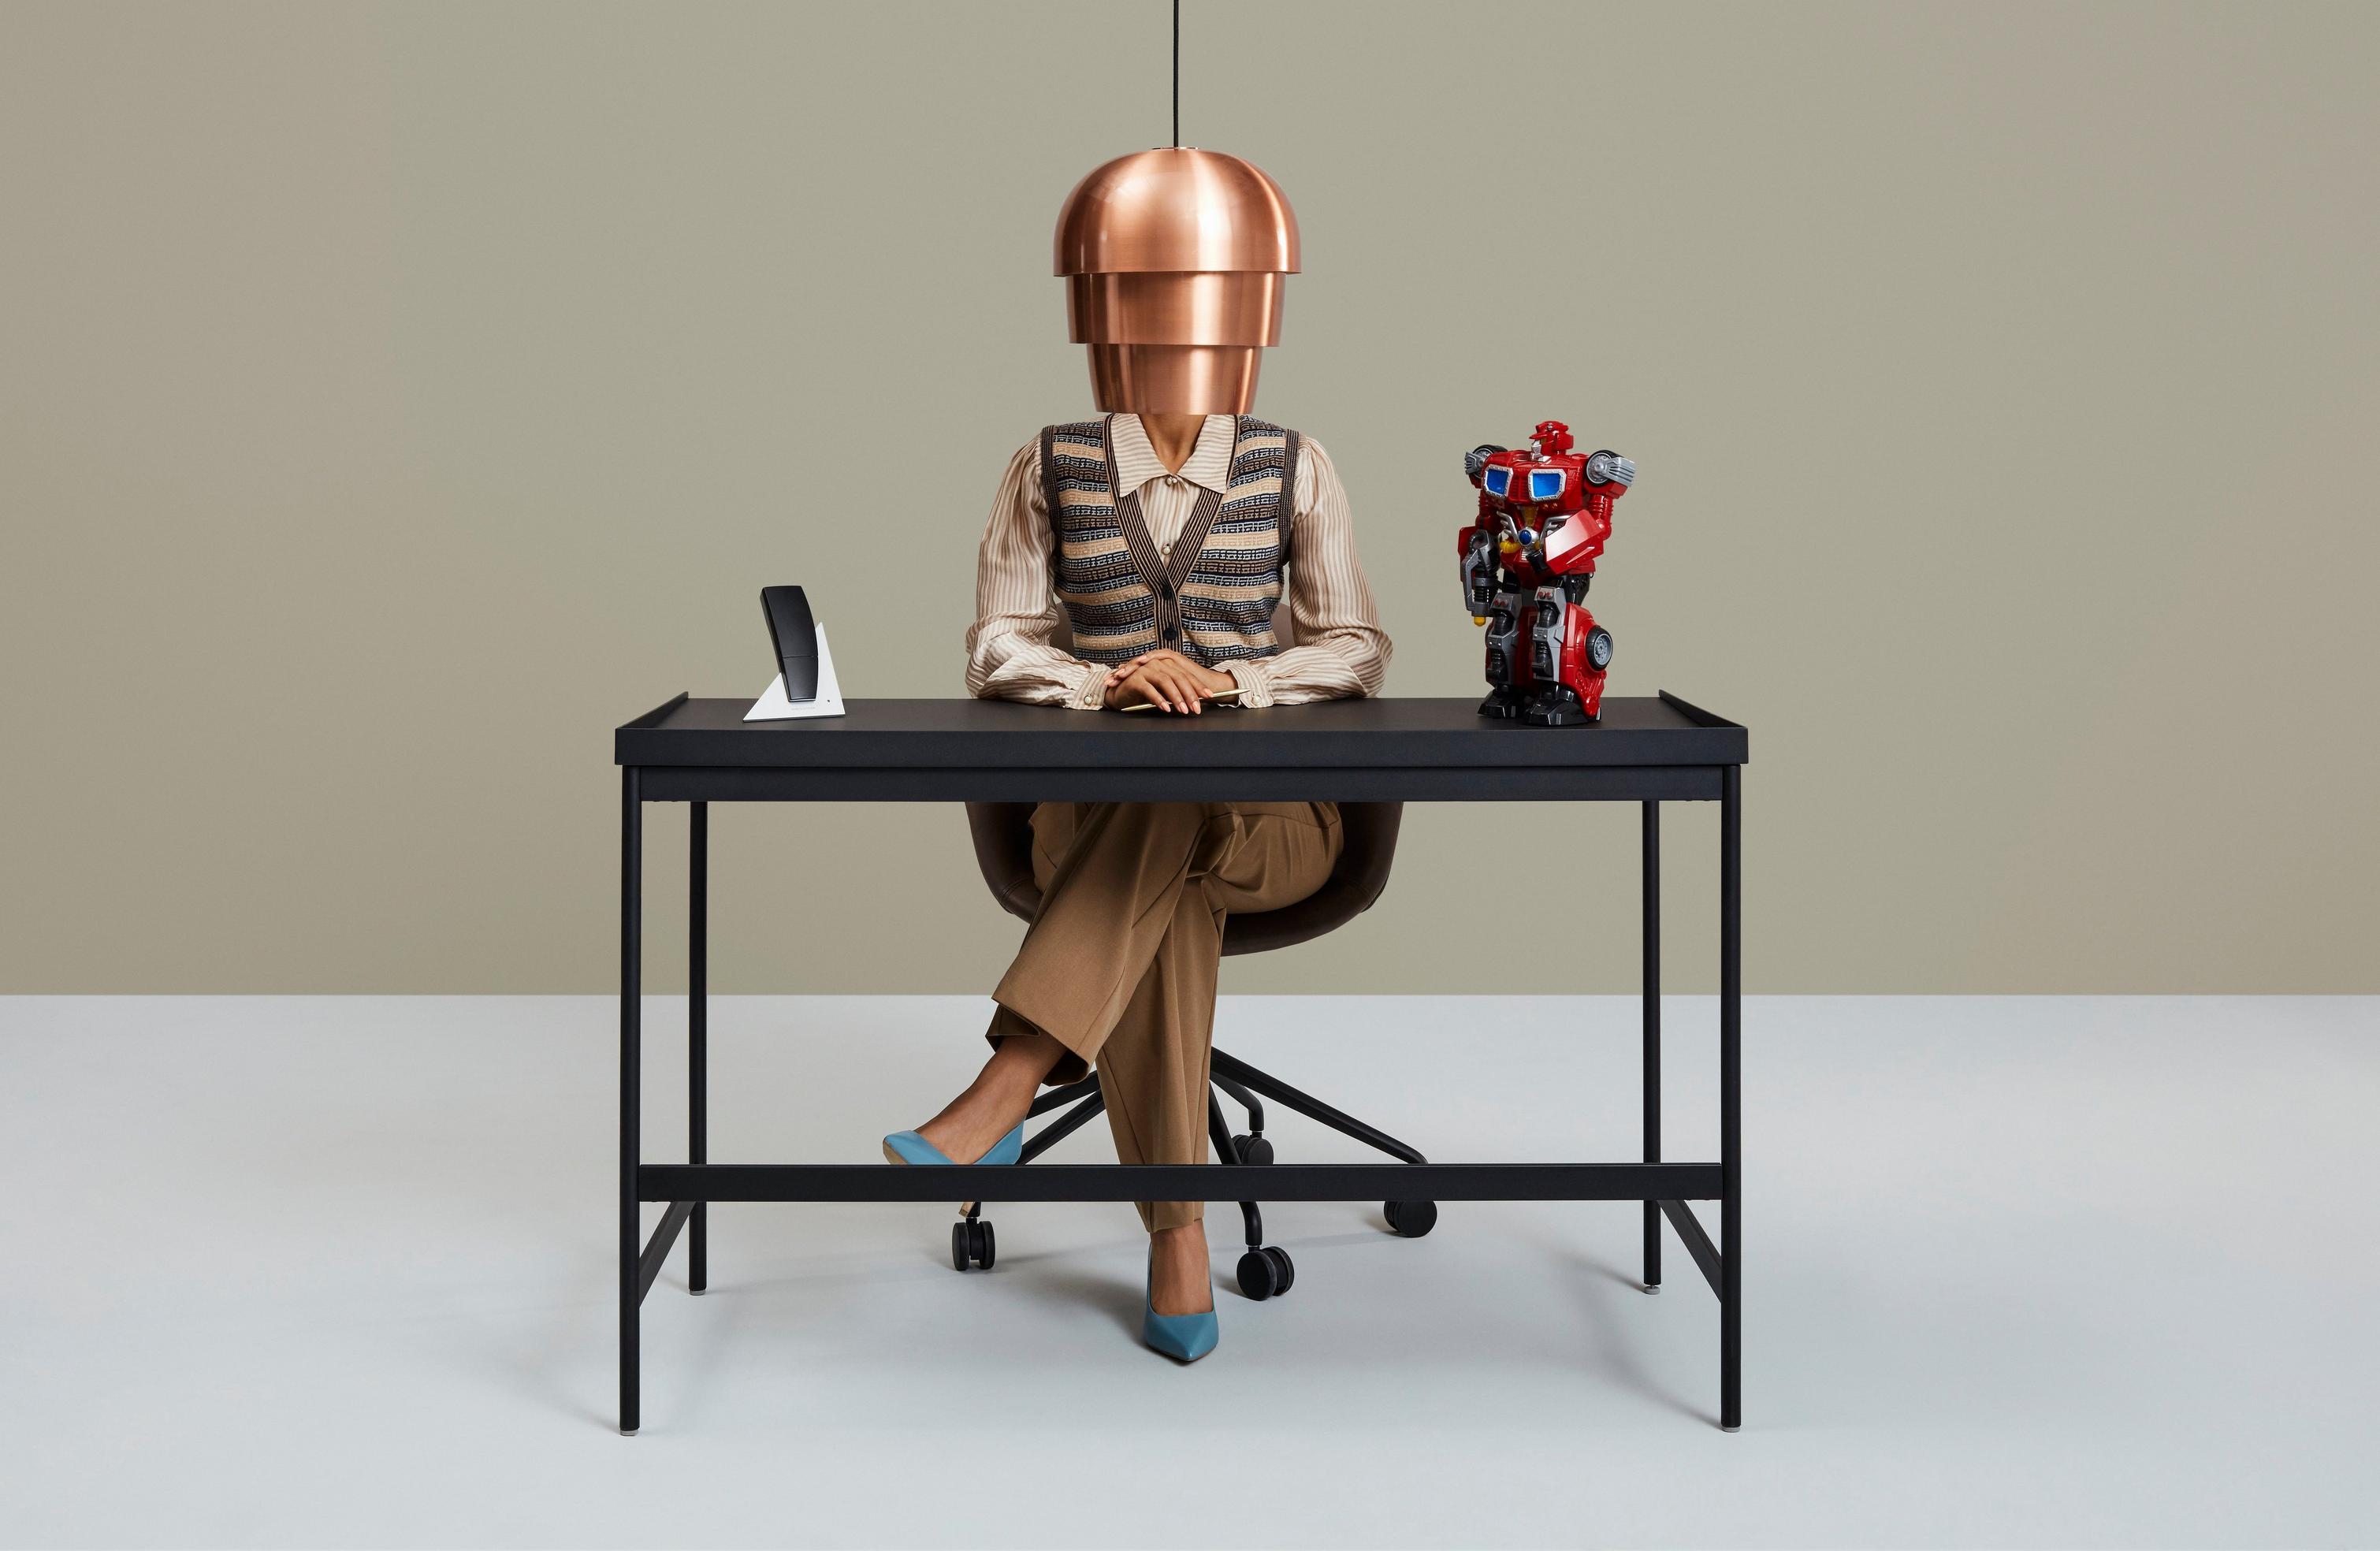 Person at desk with a lampshade headpiece, phone, and colorful robot figurine.